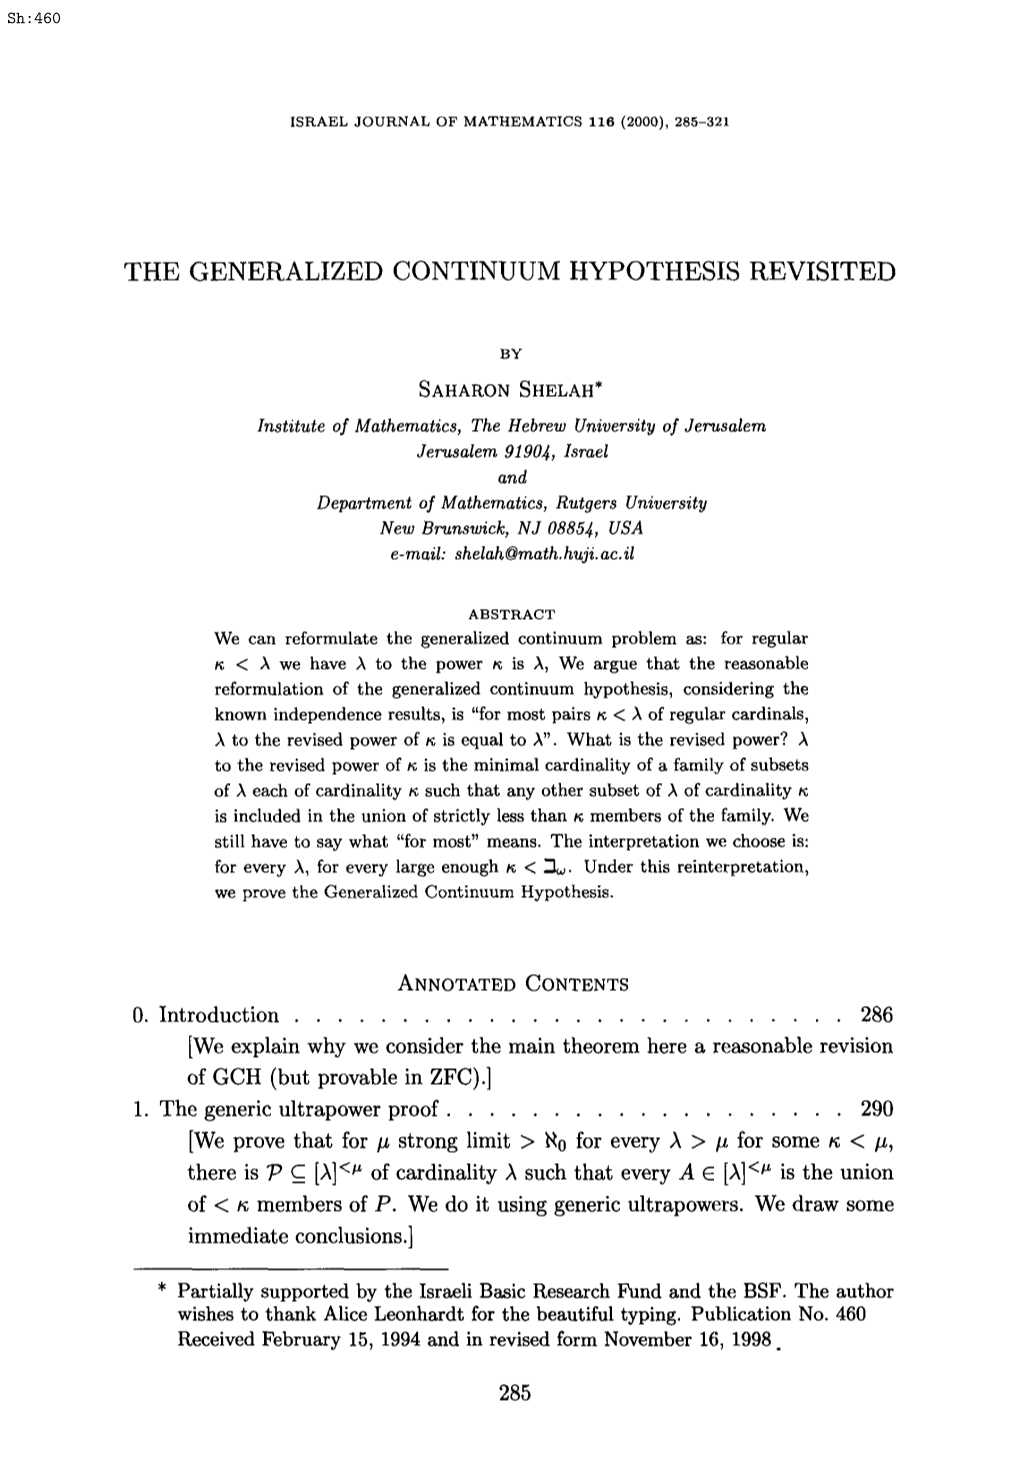 The Generalized Continuum Hypothesis Revisited